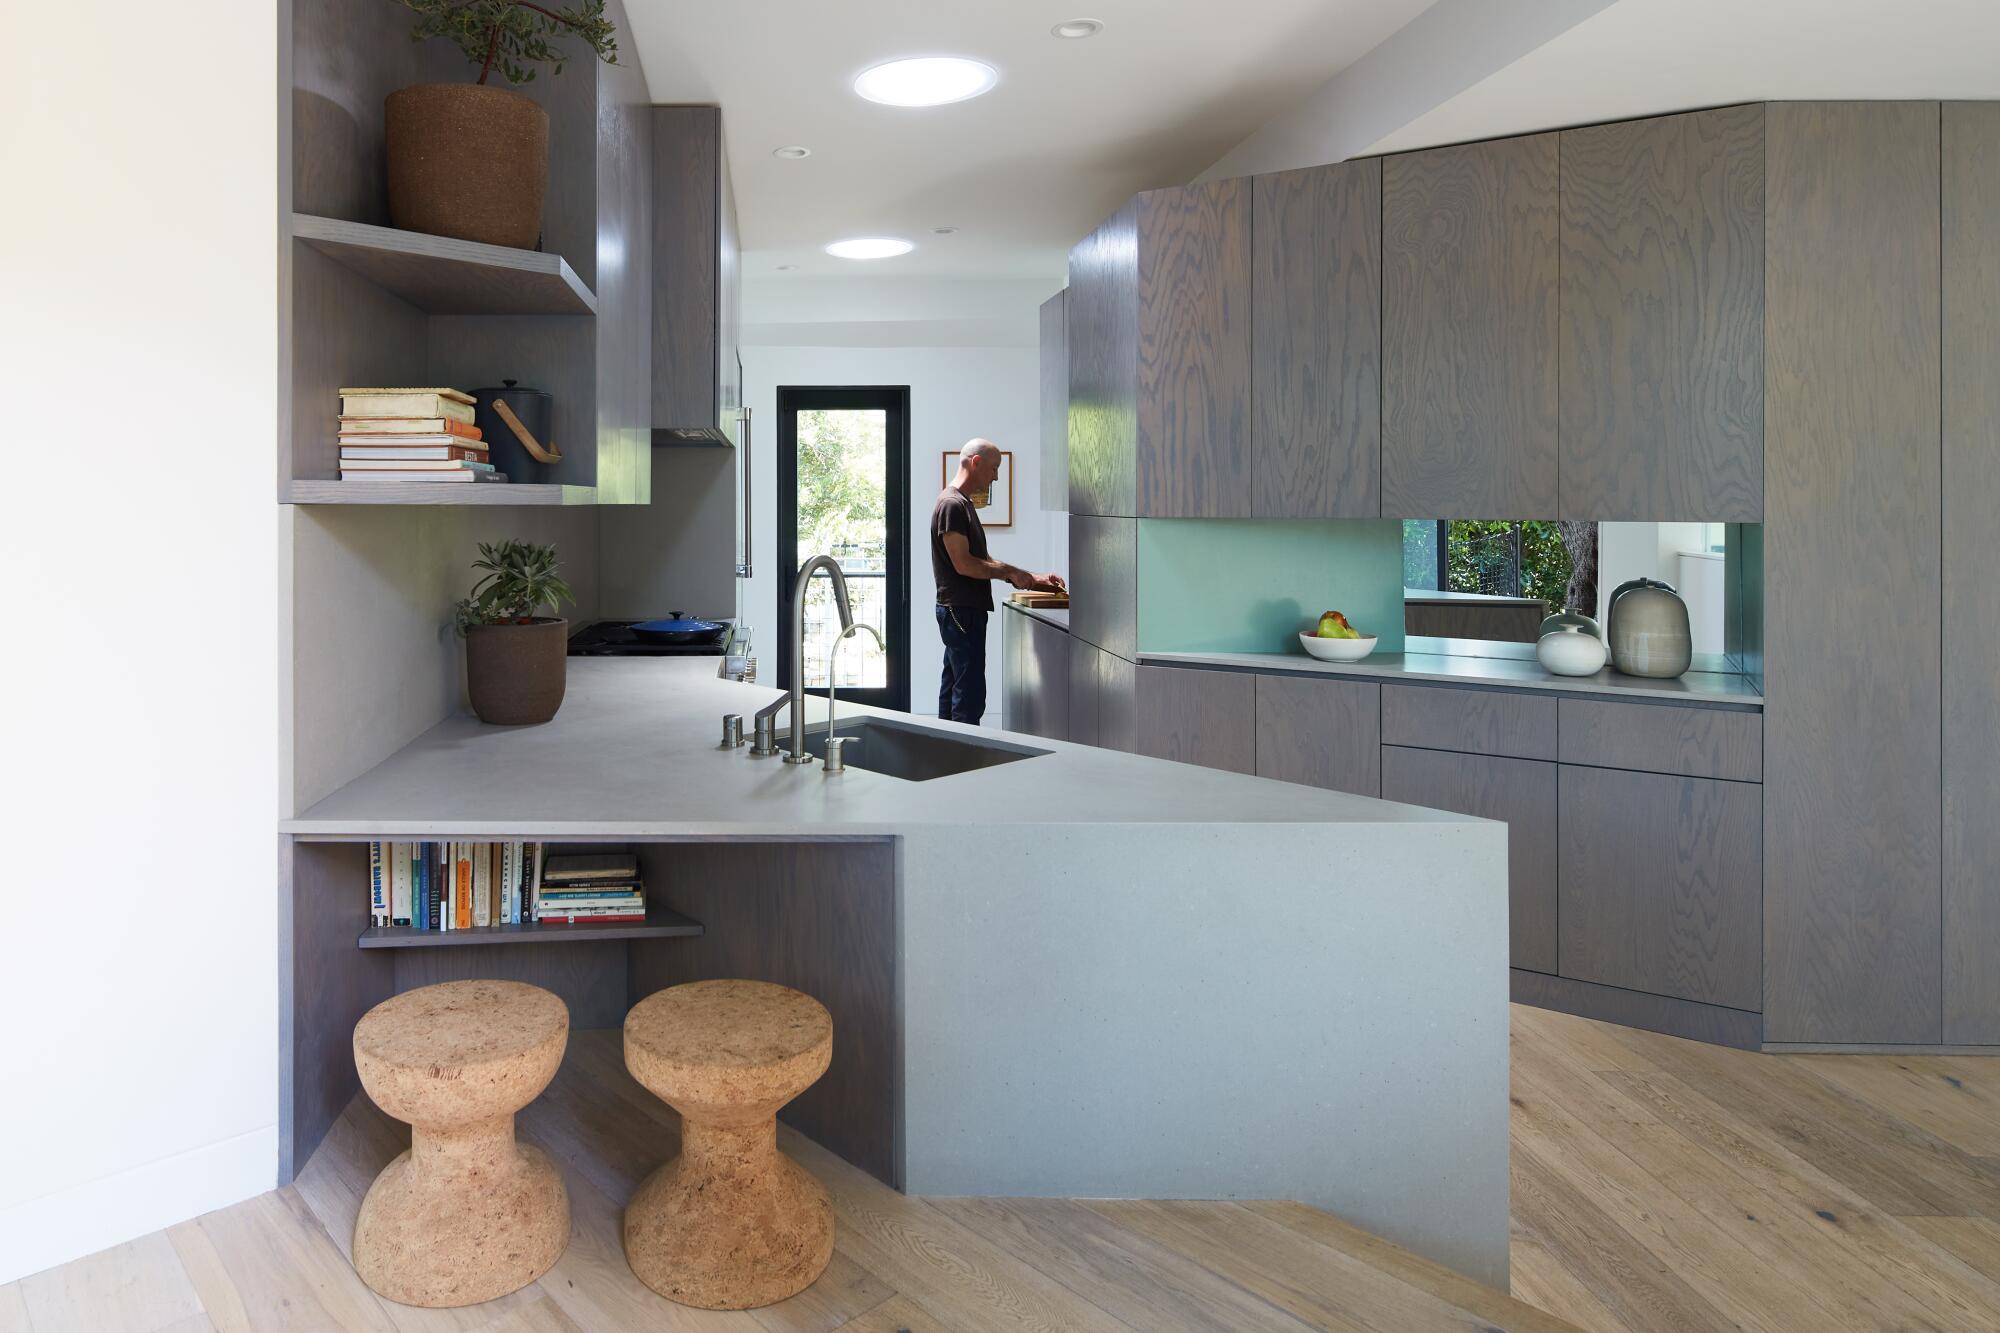 The cabinets in the kitchen are painted a gray tone that echoes the olive tree outside.